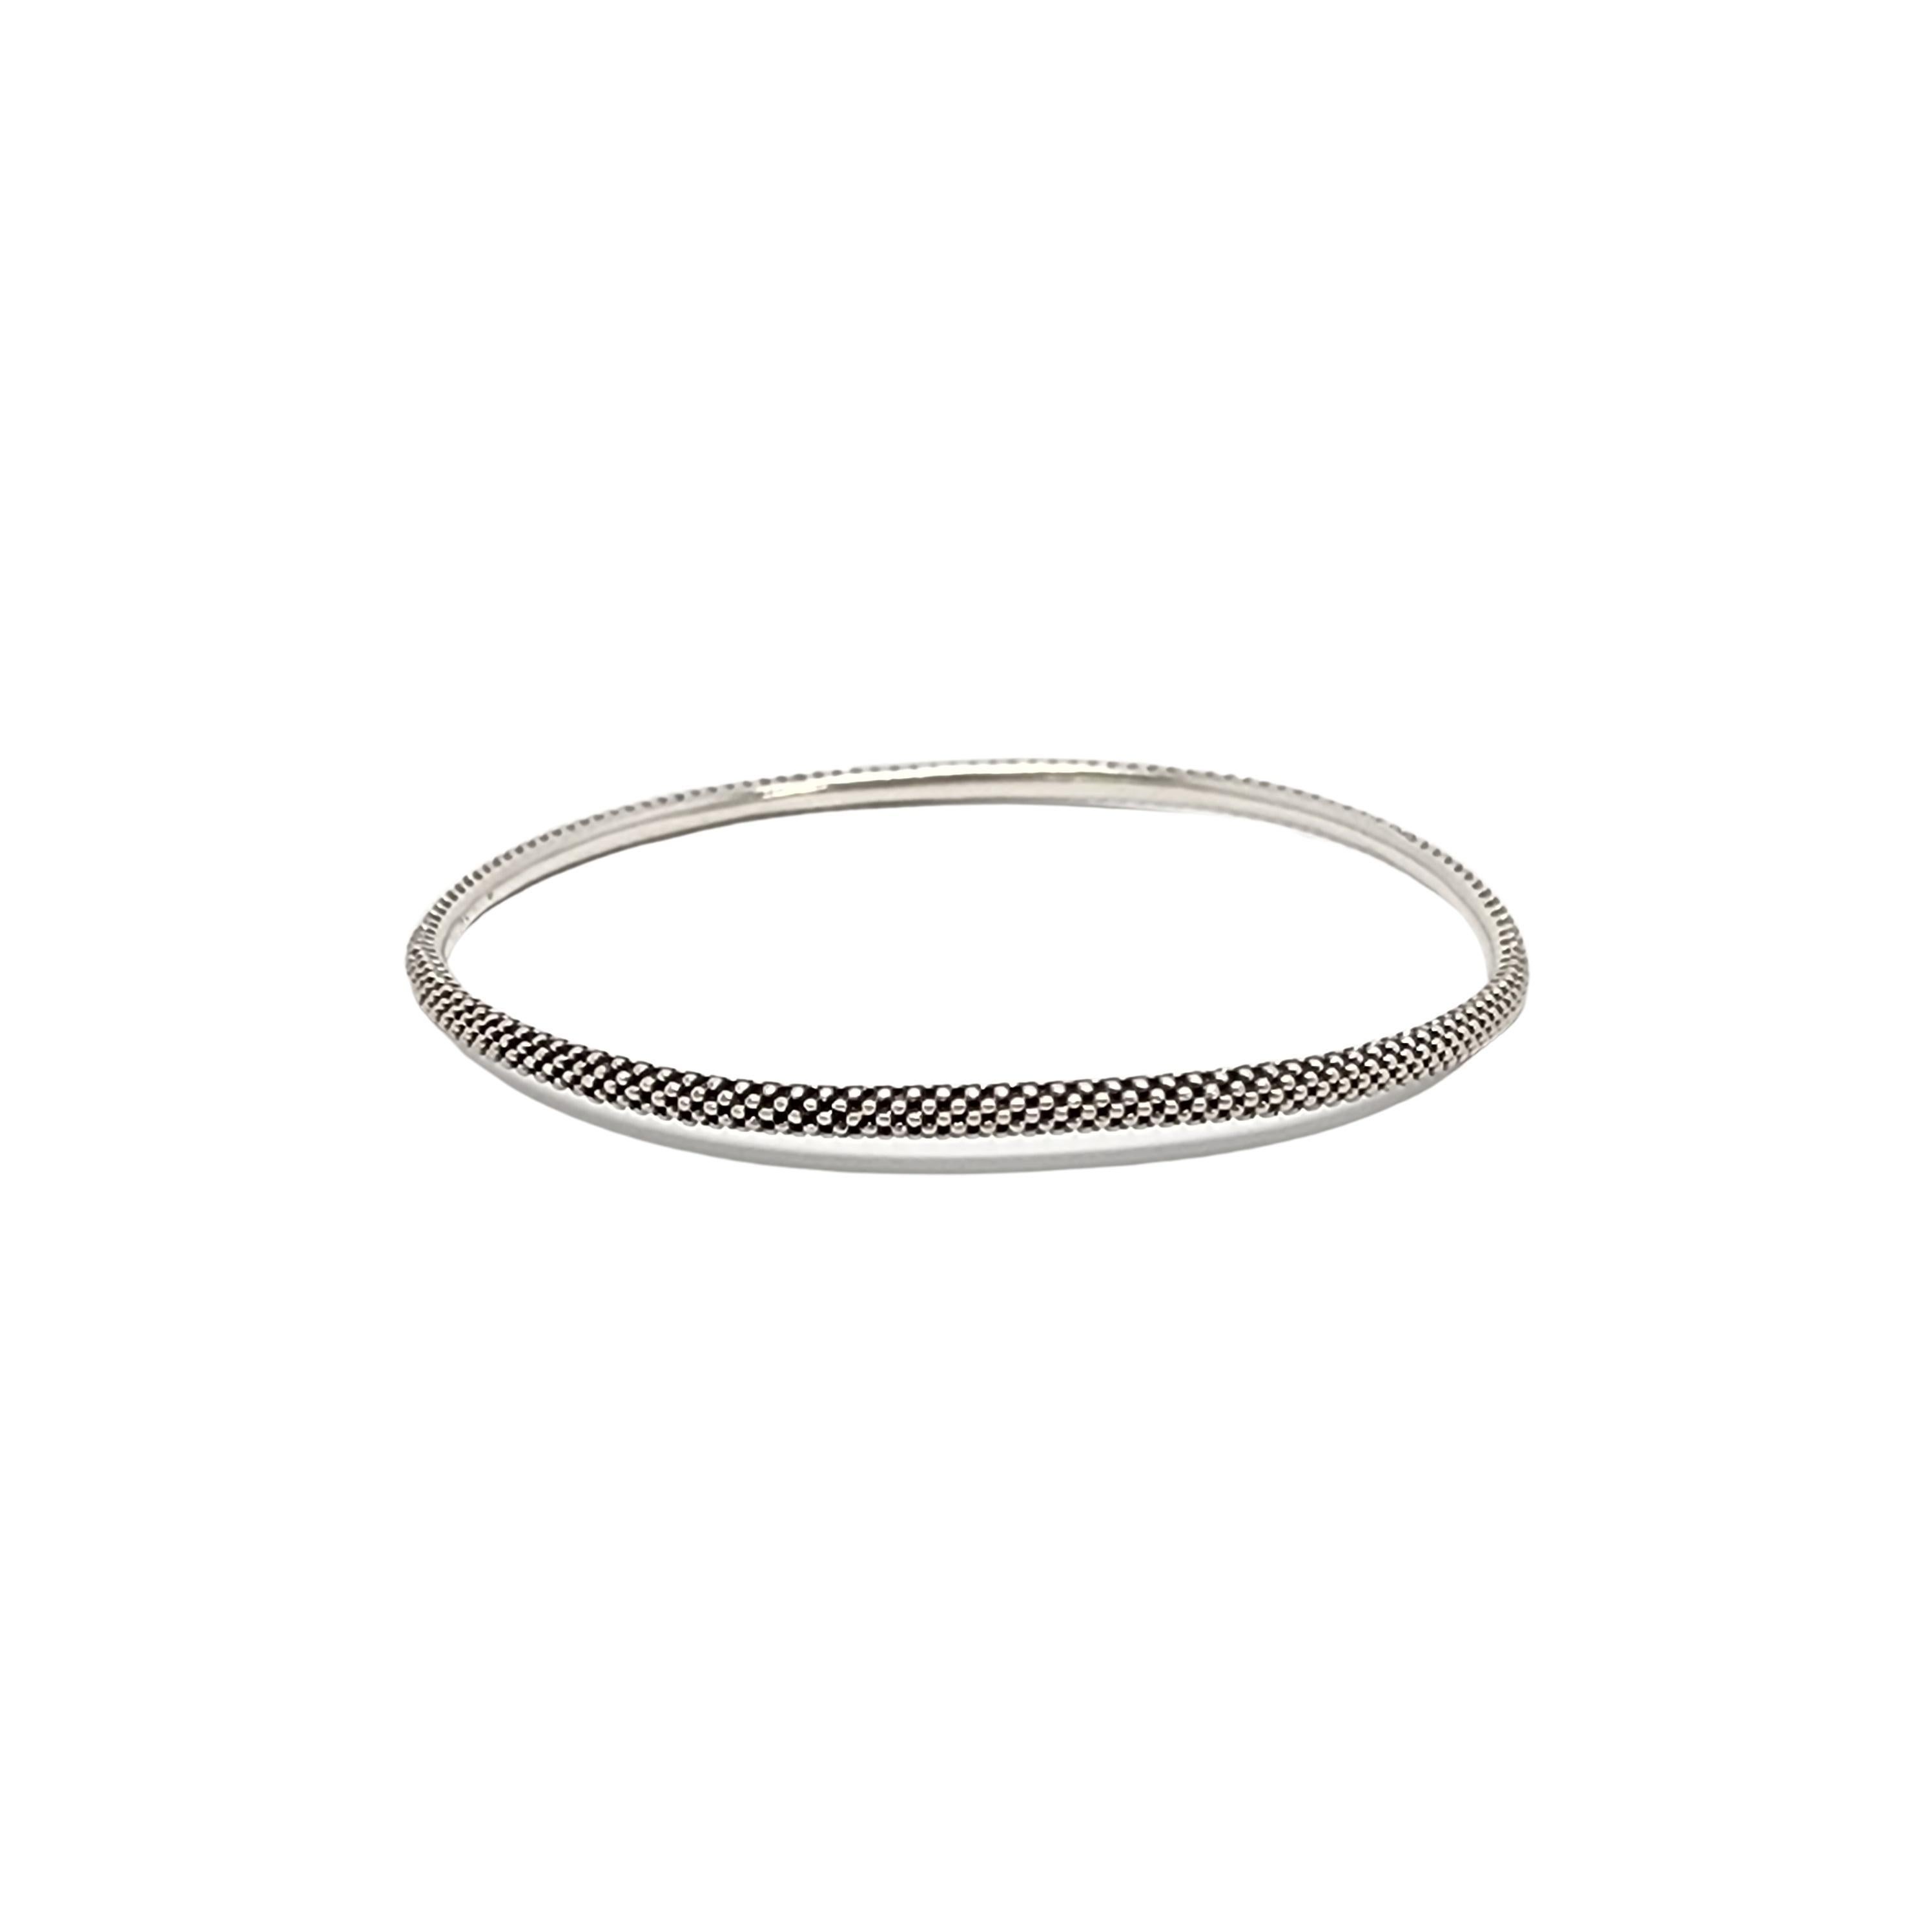 Lagos Signature Caviar sterling silver bangle bracelet.

Beautiful beaded thin bangle bracelet in Lagos iconic caviar design.

Measures approx 3mm wide, 8